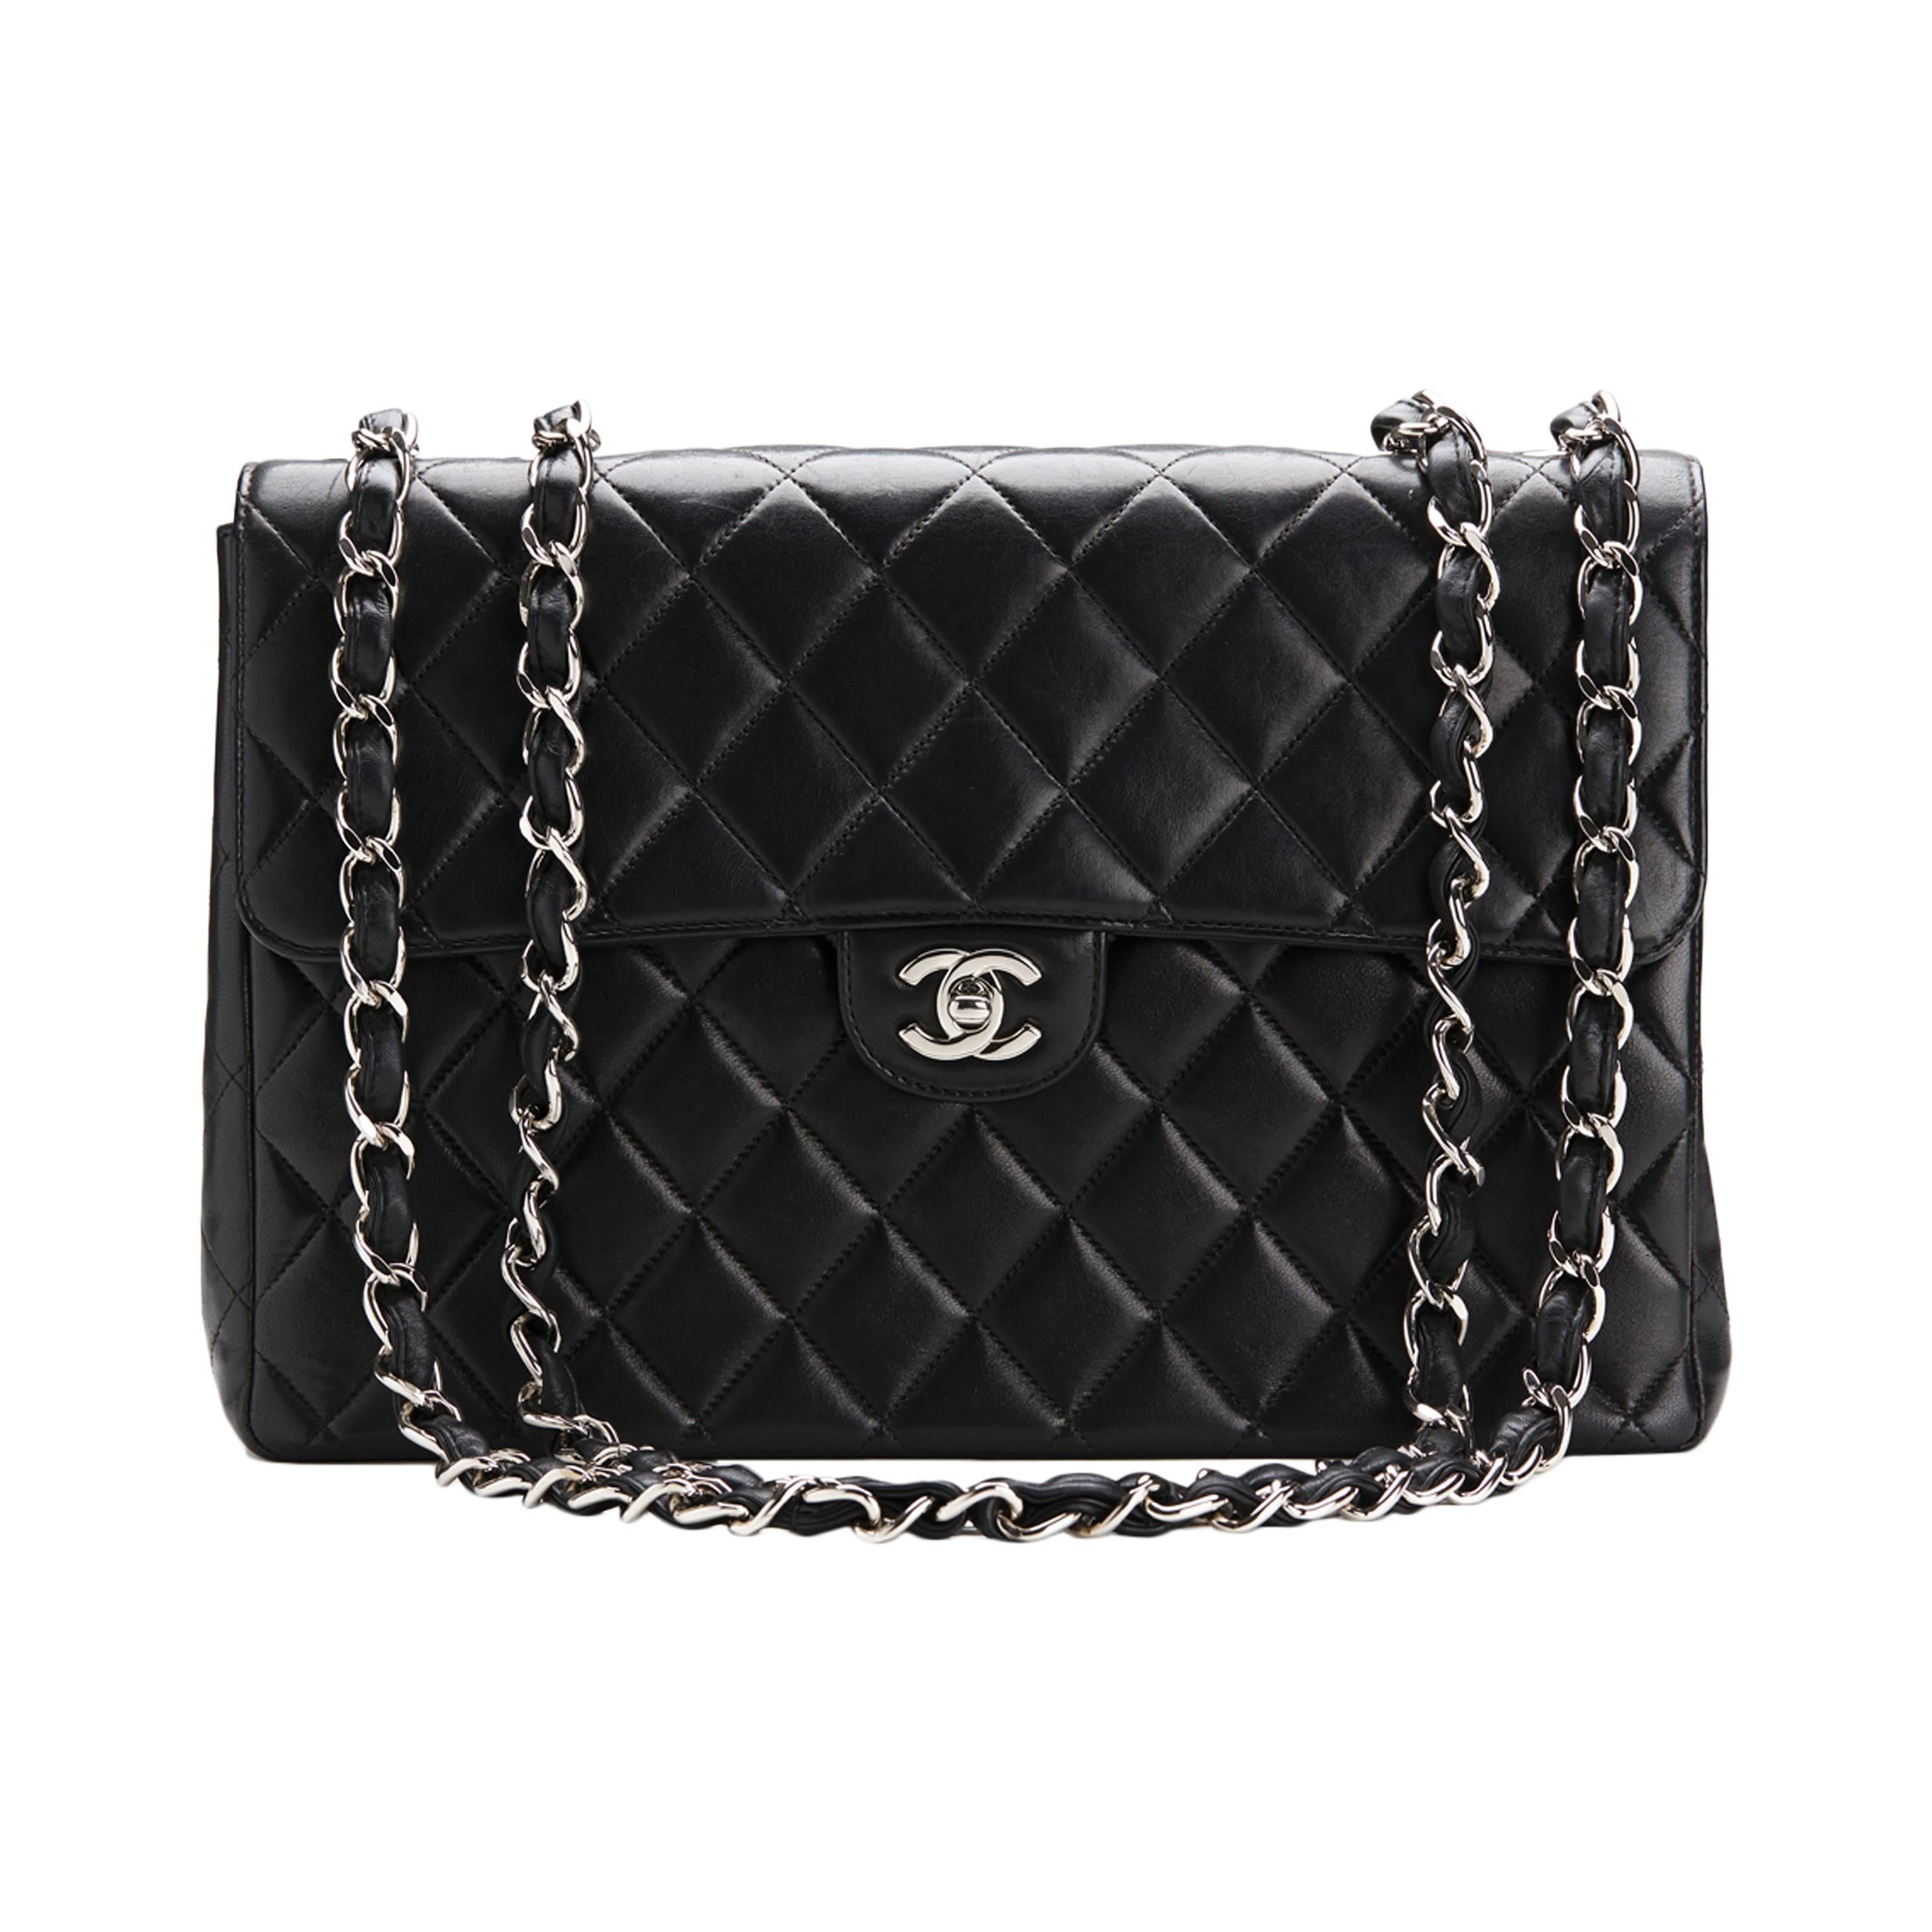 2000s Chanel Black Quilted Lambskin Jumbo Flap Bag